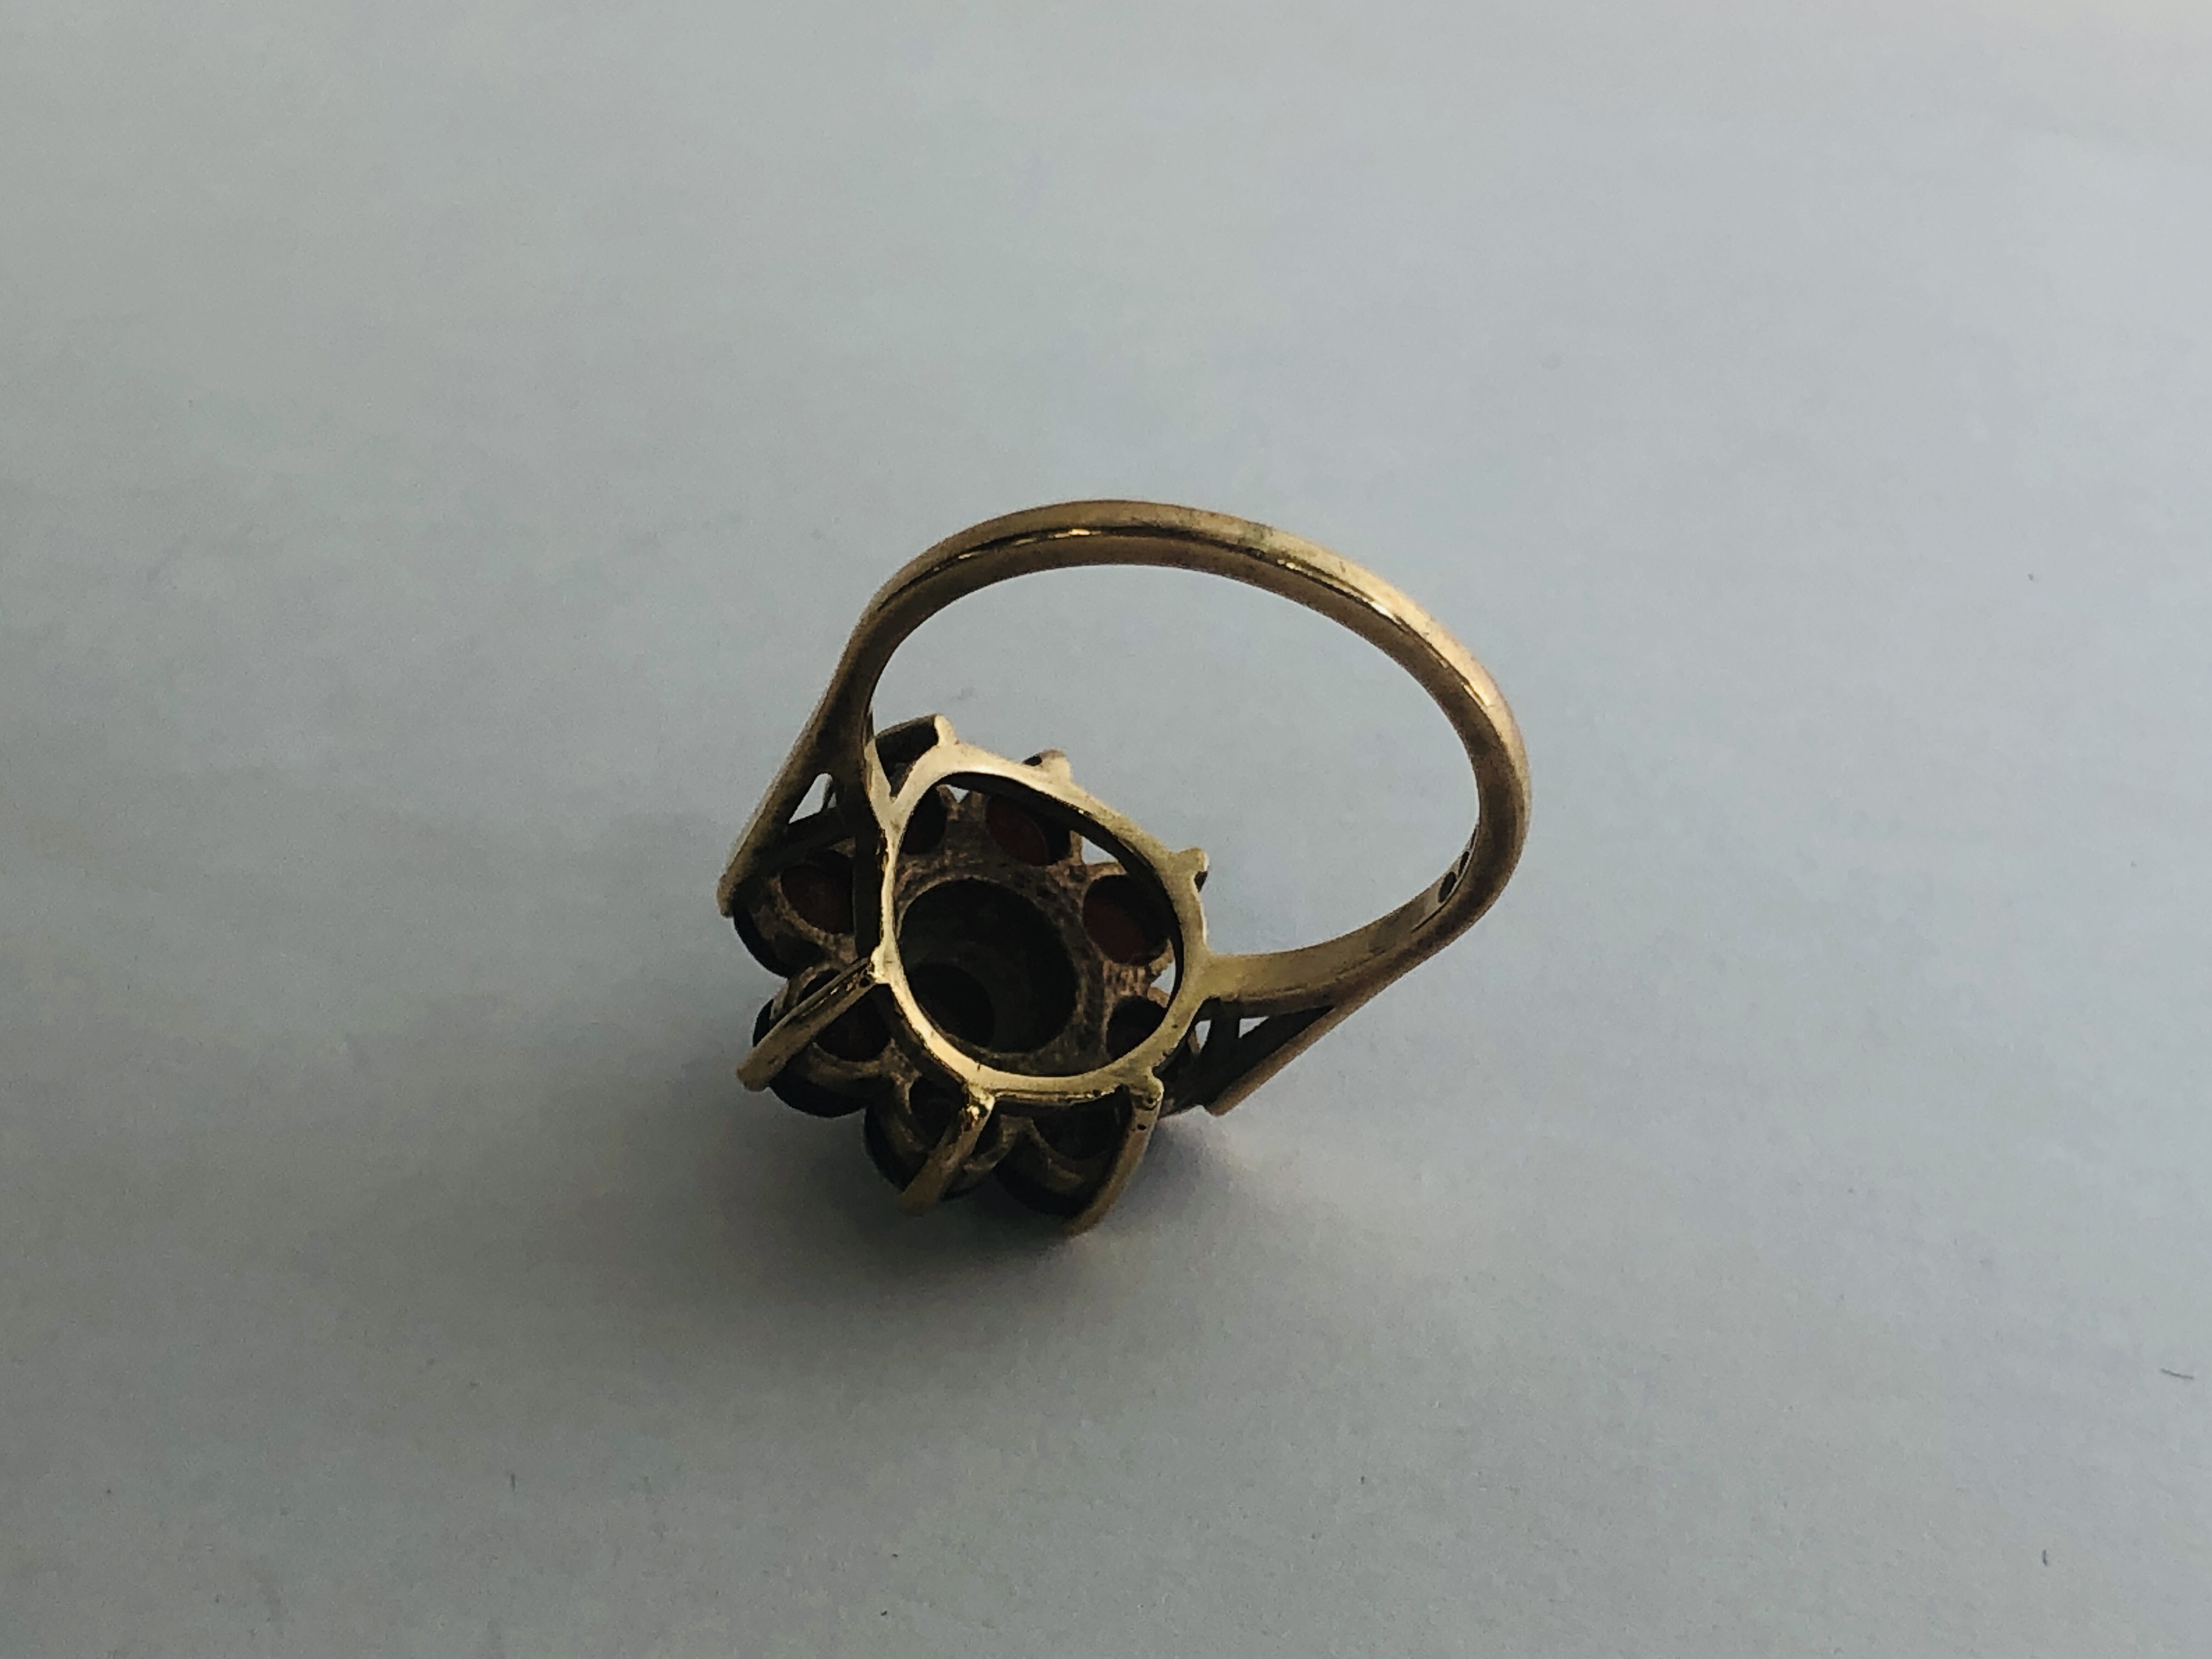 9CT GOLD LADIES RING, FLOWER HEAD DESIGN SET WITH GARNETS AND SEED PEARLS (1 SEED PEARL MISSING). - Image 6 of 9